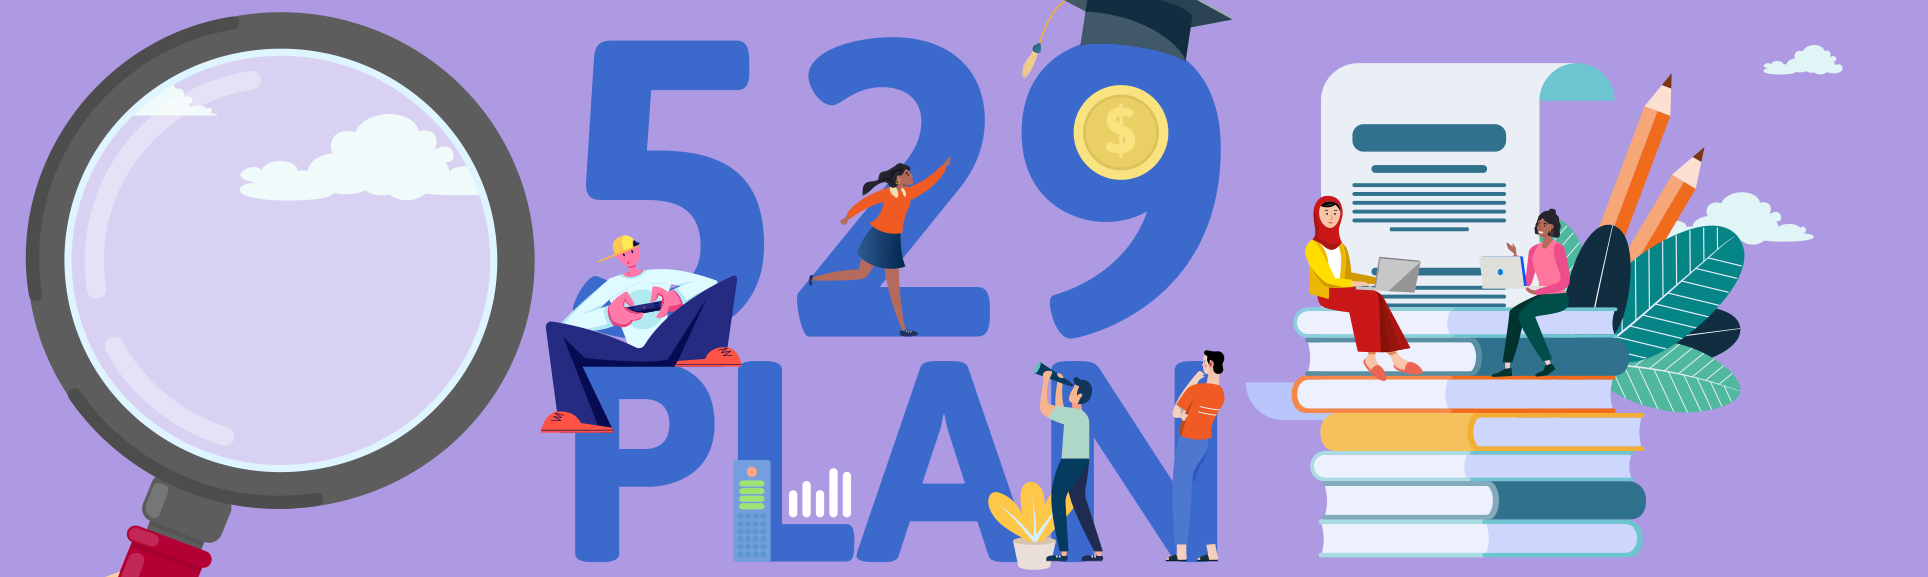 The 529 Plan: Save on taxes while saving for college